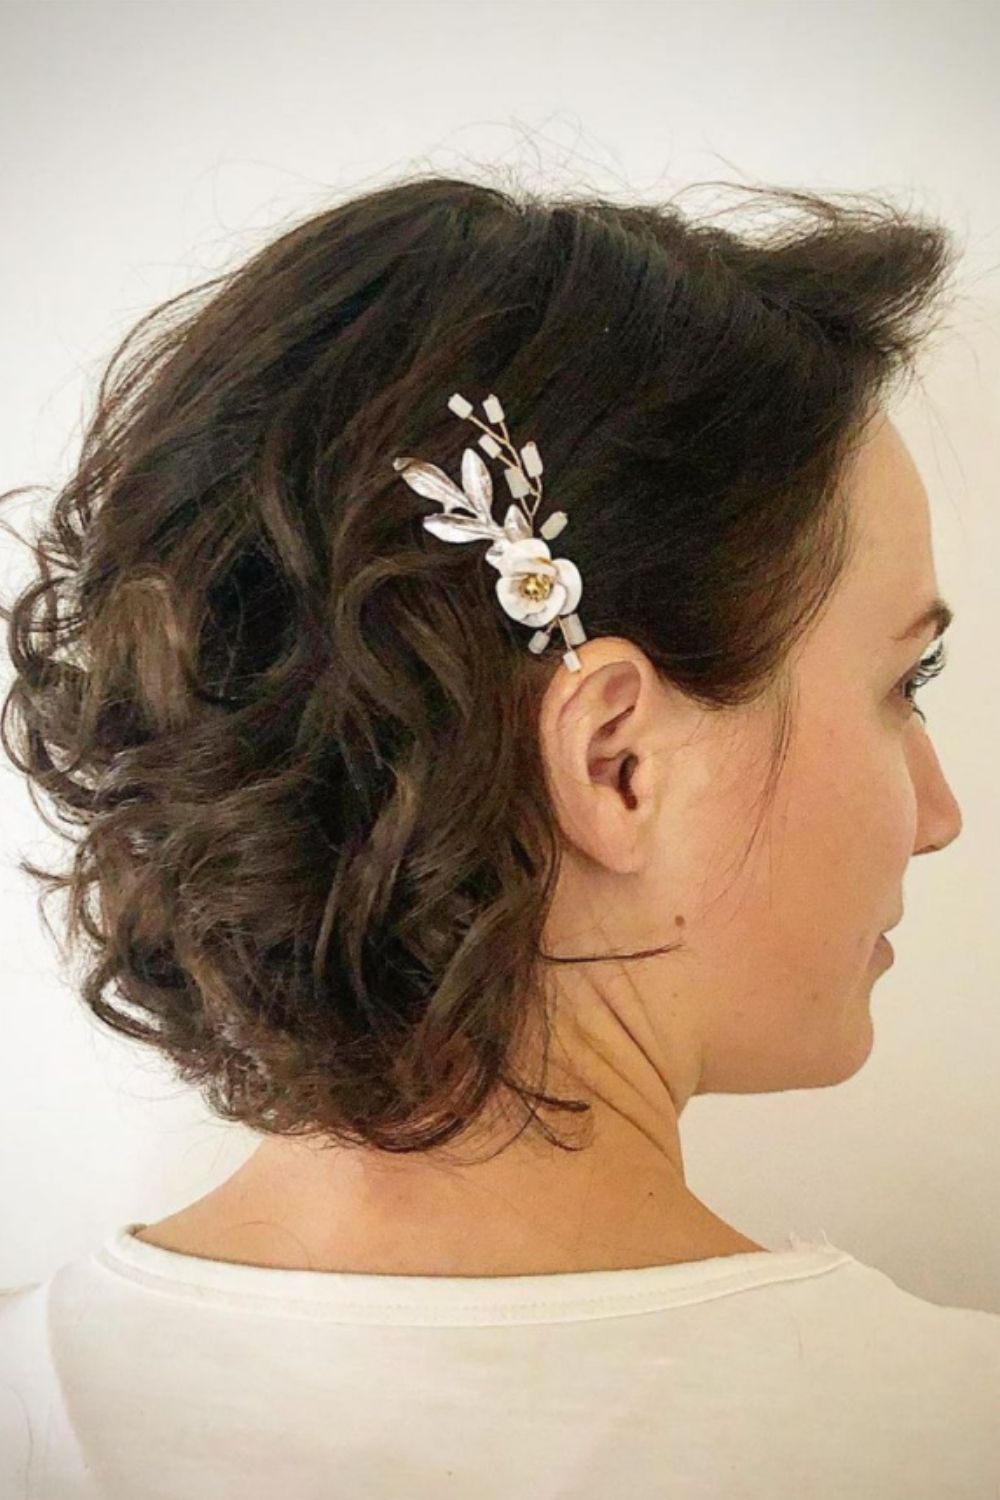 How to styles the wedding hairstyles for short hair